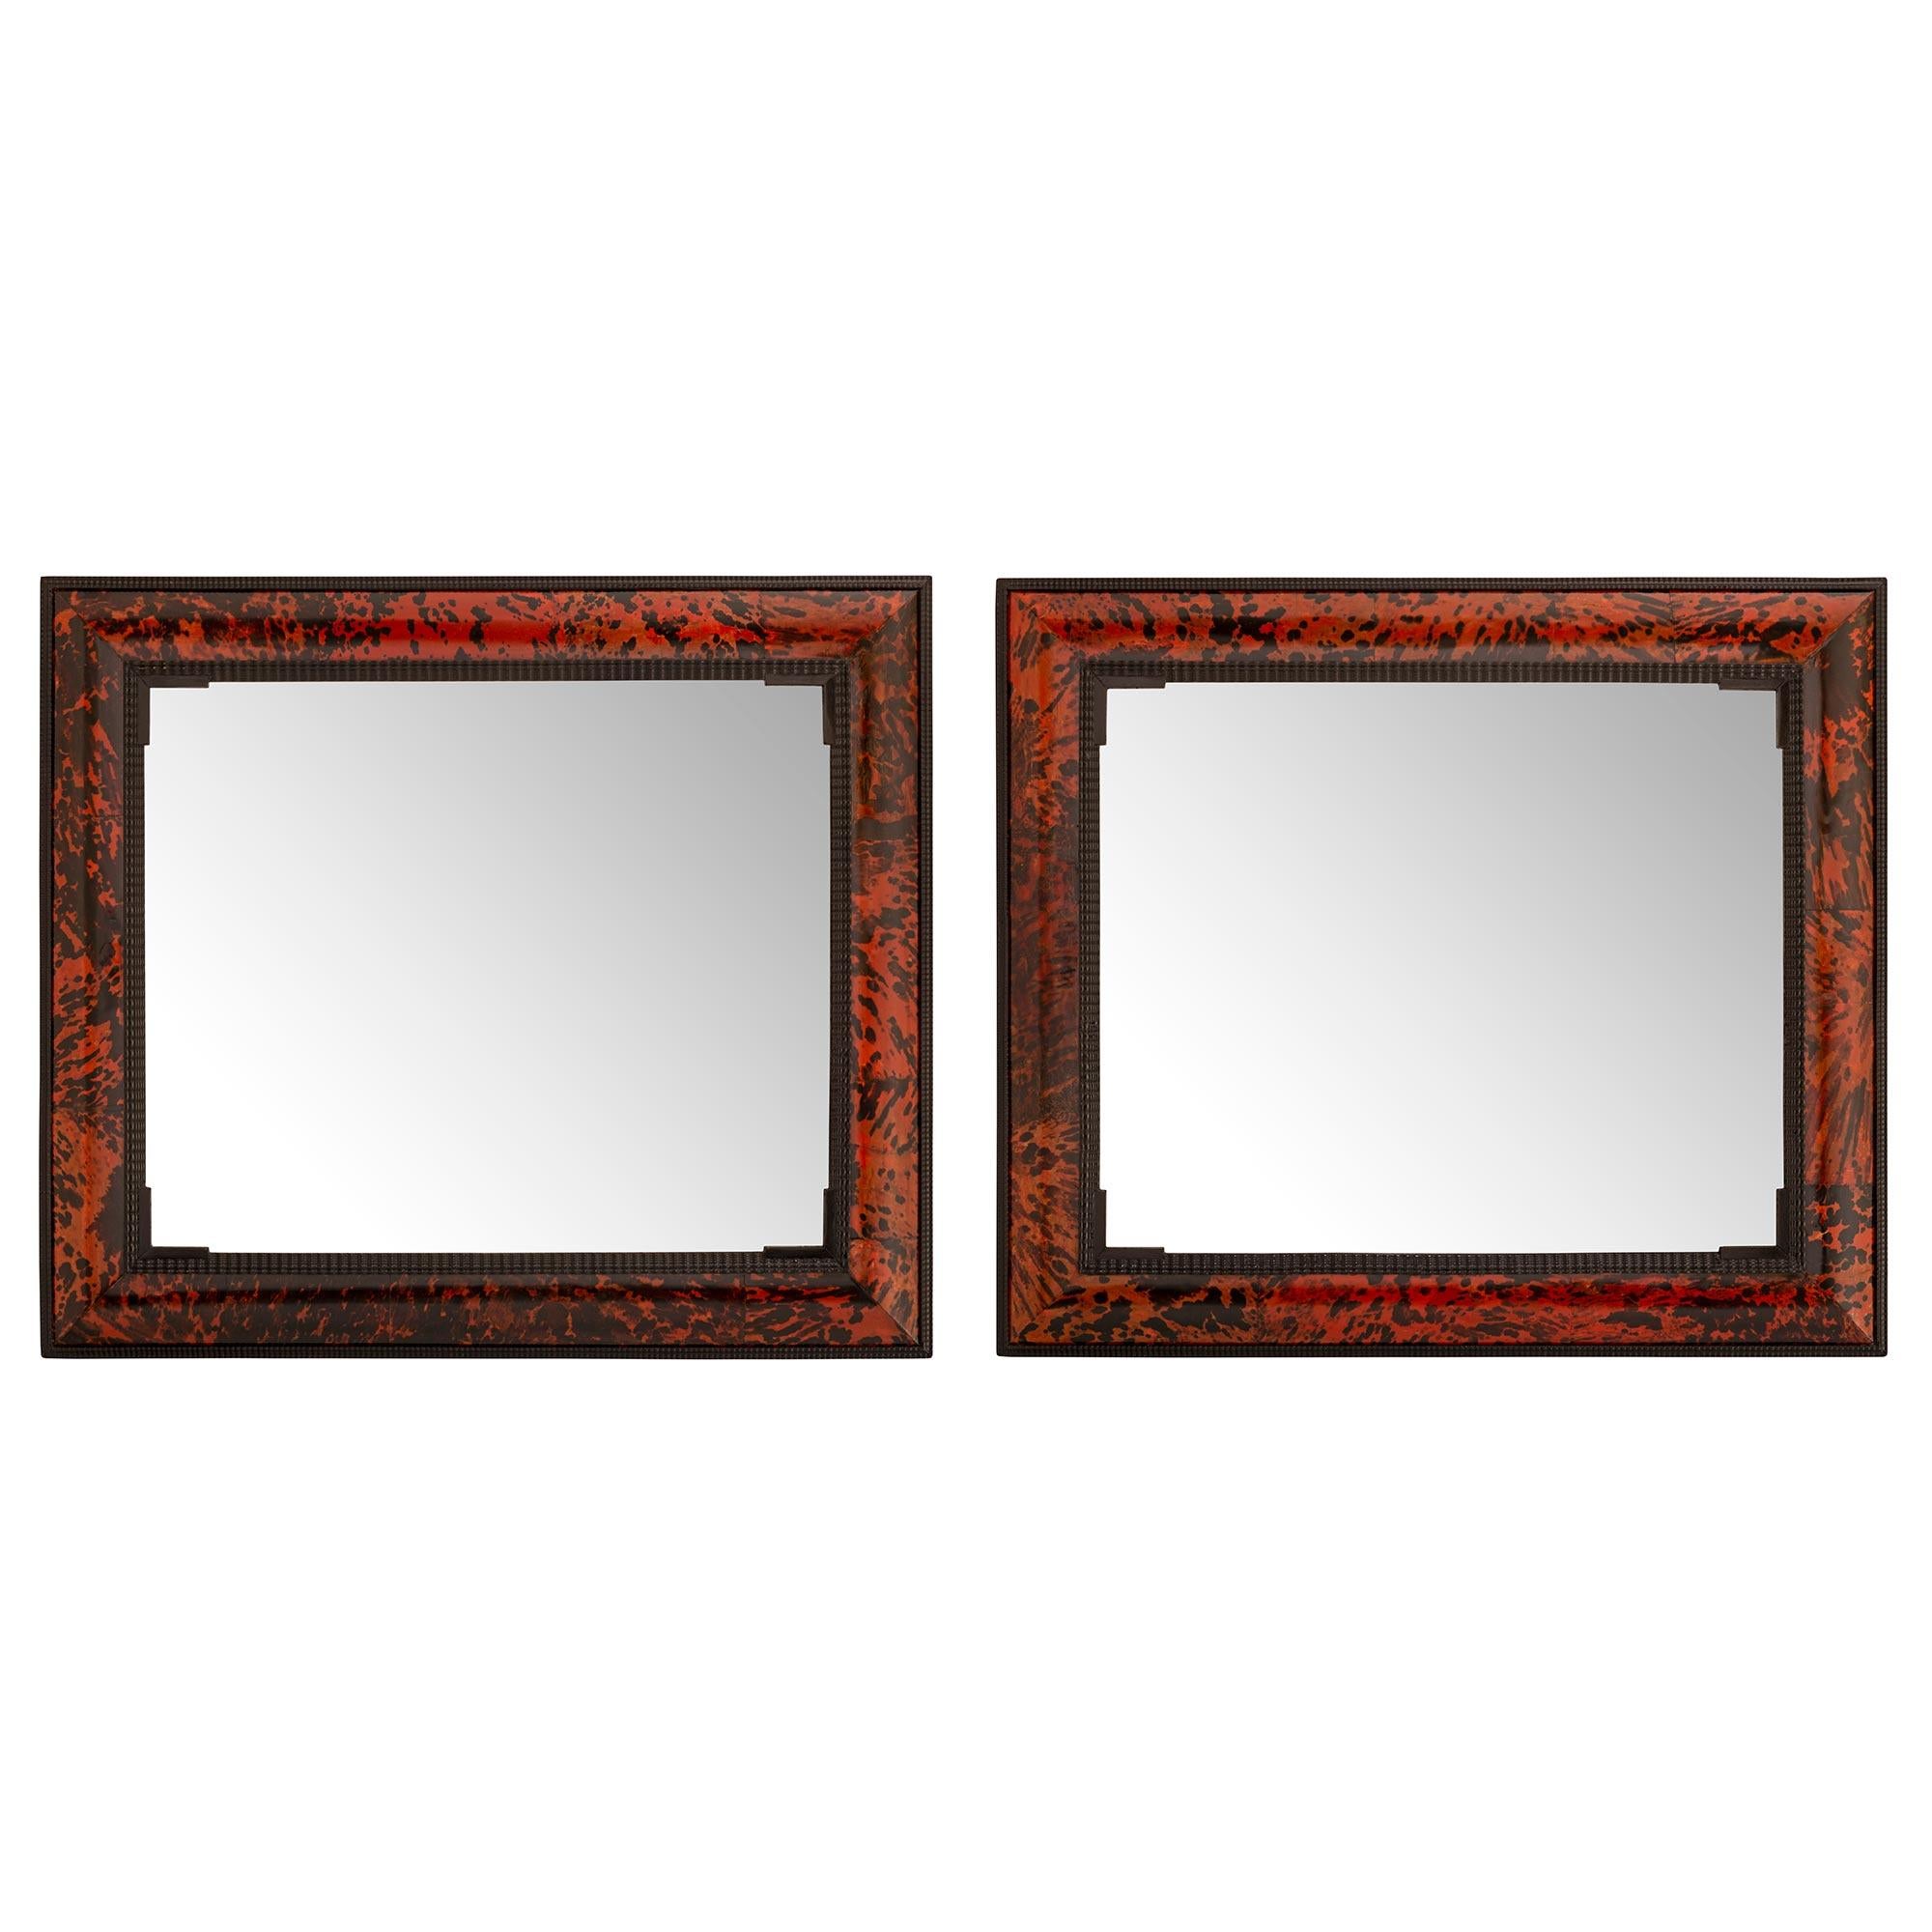 Tortoise Shell Pair of Flemish Early 19th Century Baroque St. Tortoiseshell Mirrors For Sale